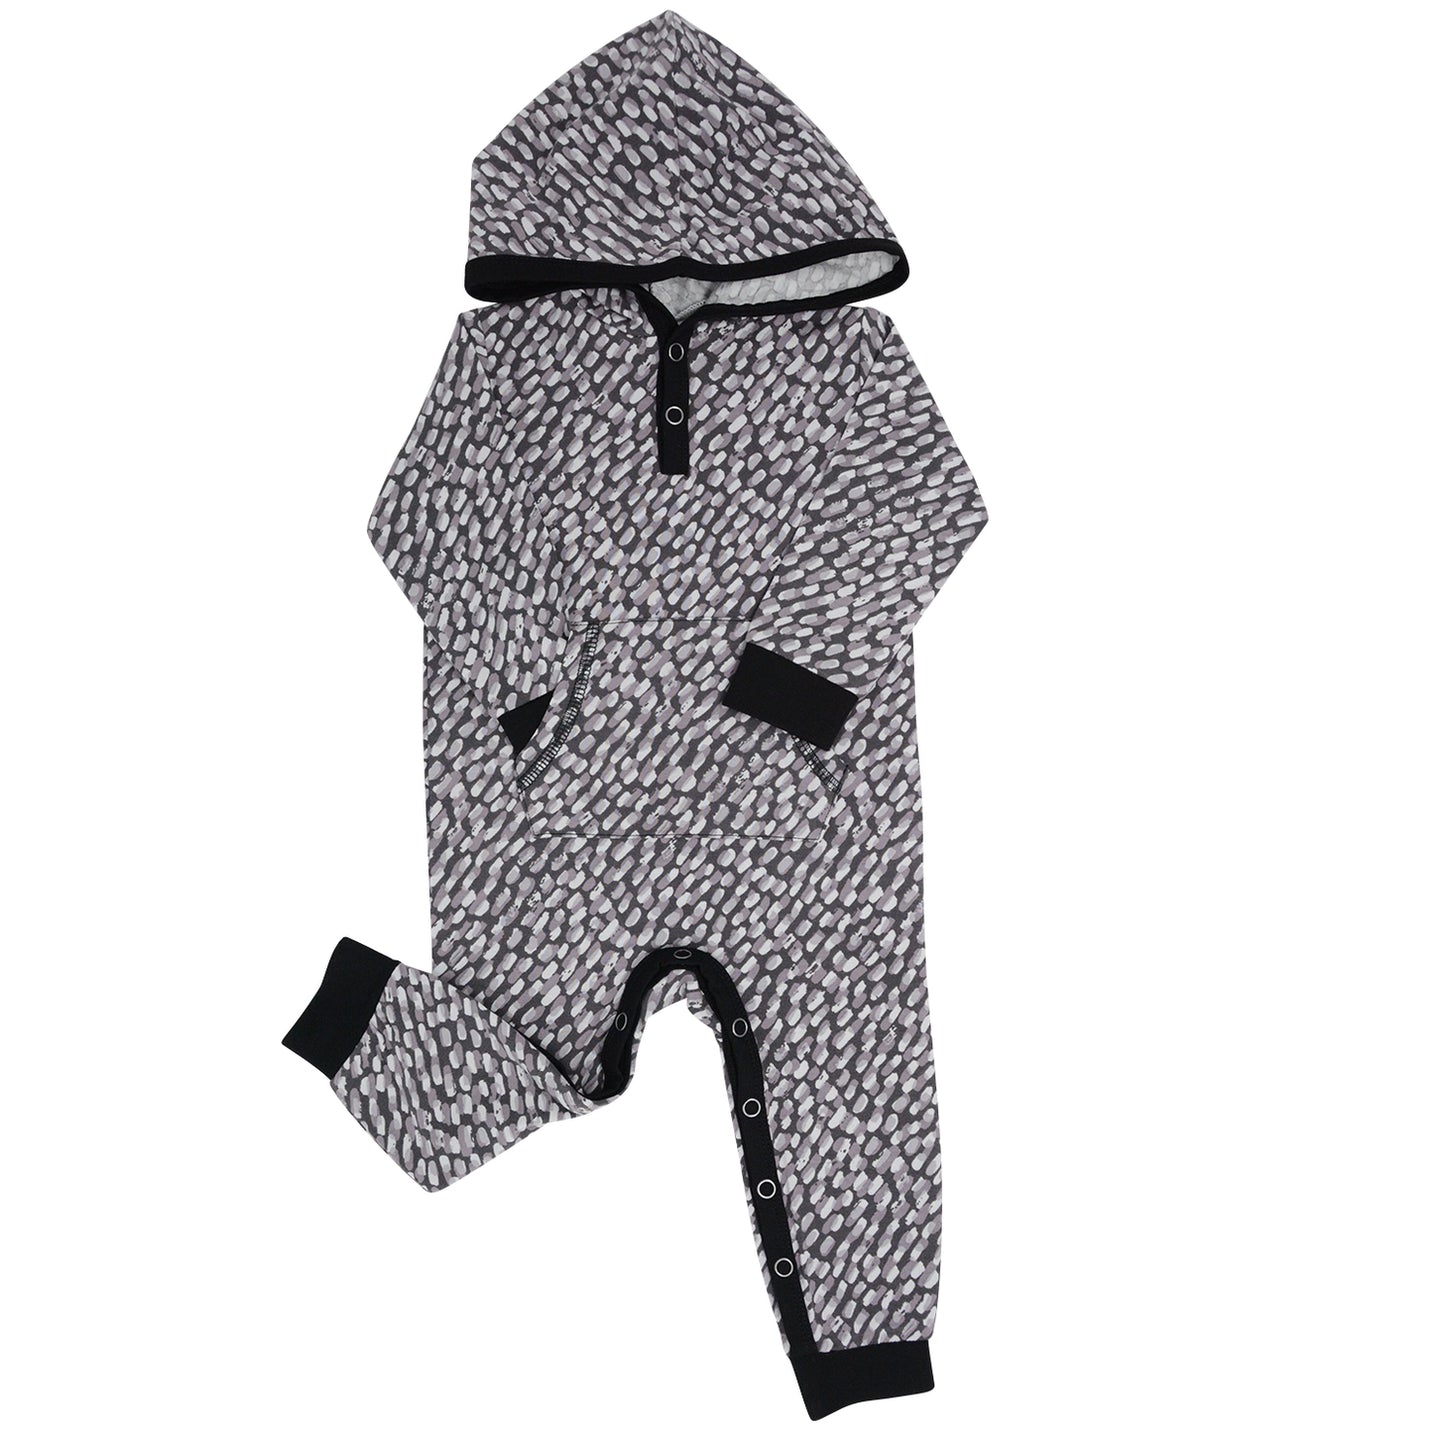 Black Printed Hooded Pocket Romper. All day comfort with a bit of style. Kangaroo pouch pocket and hood. Cuffed legs and arms with snap closure inseam and placket. Tagless label for total comfort. Flexible for active lifestyles. Safe for sensitive skin.  Machine Washable.  95% Bamboo Viscose, 5% Spandex.